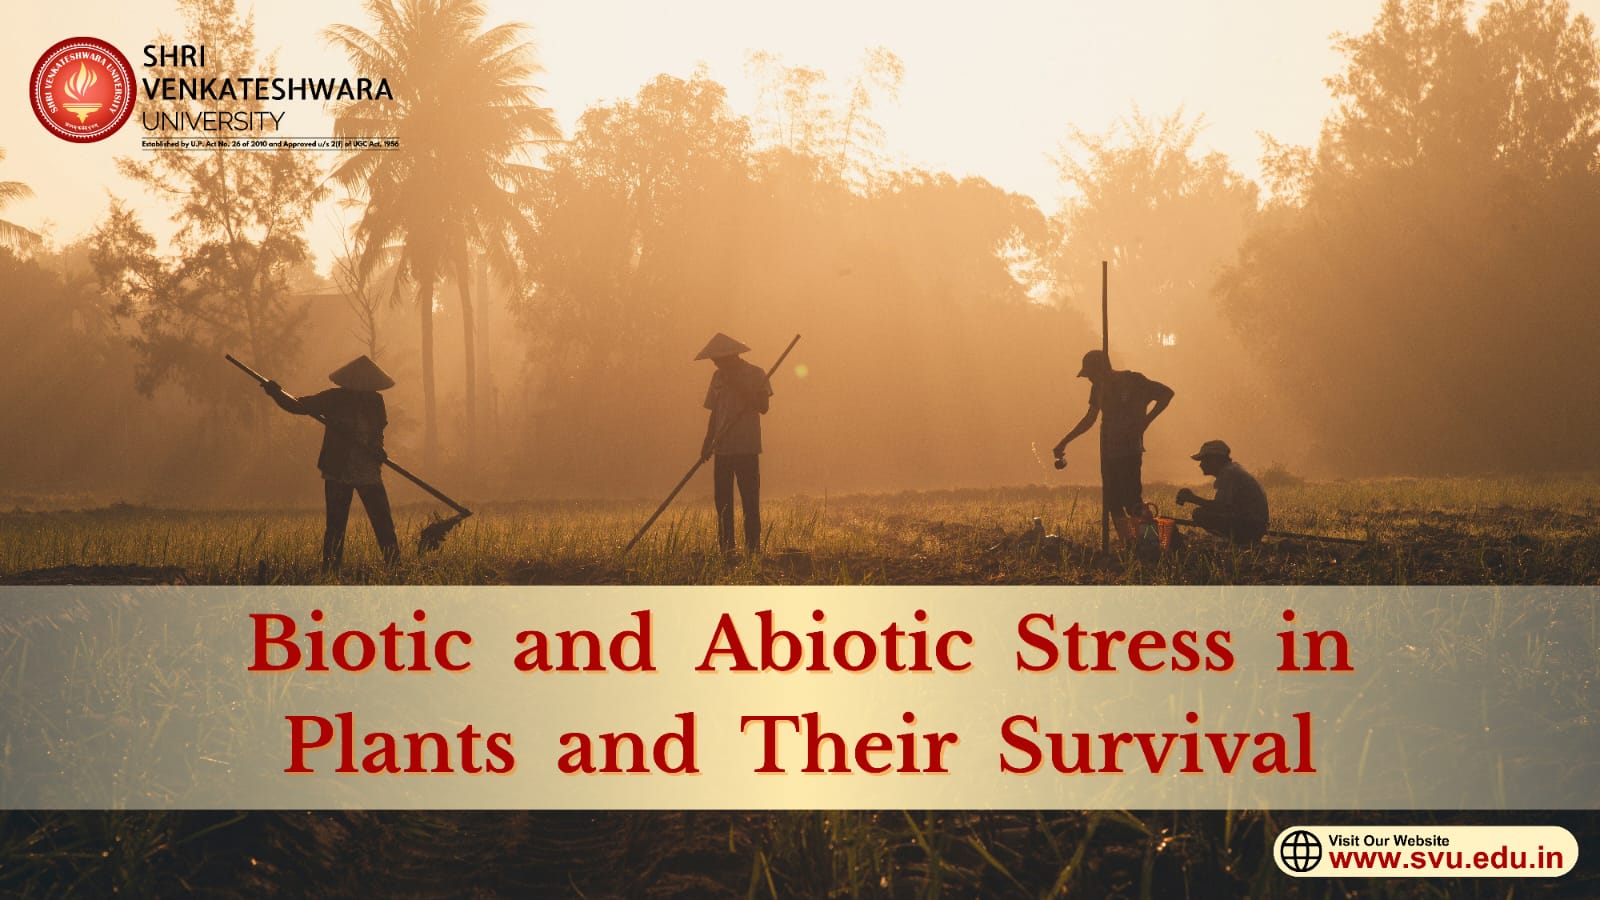 Biotic and Abiotic Stress in Plants and Their Survival